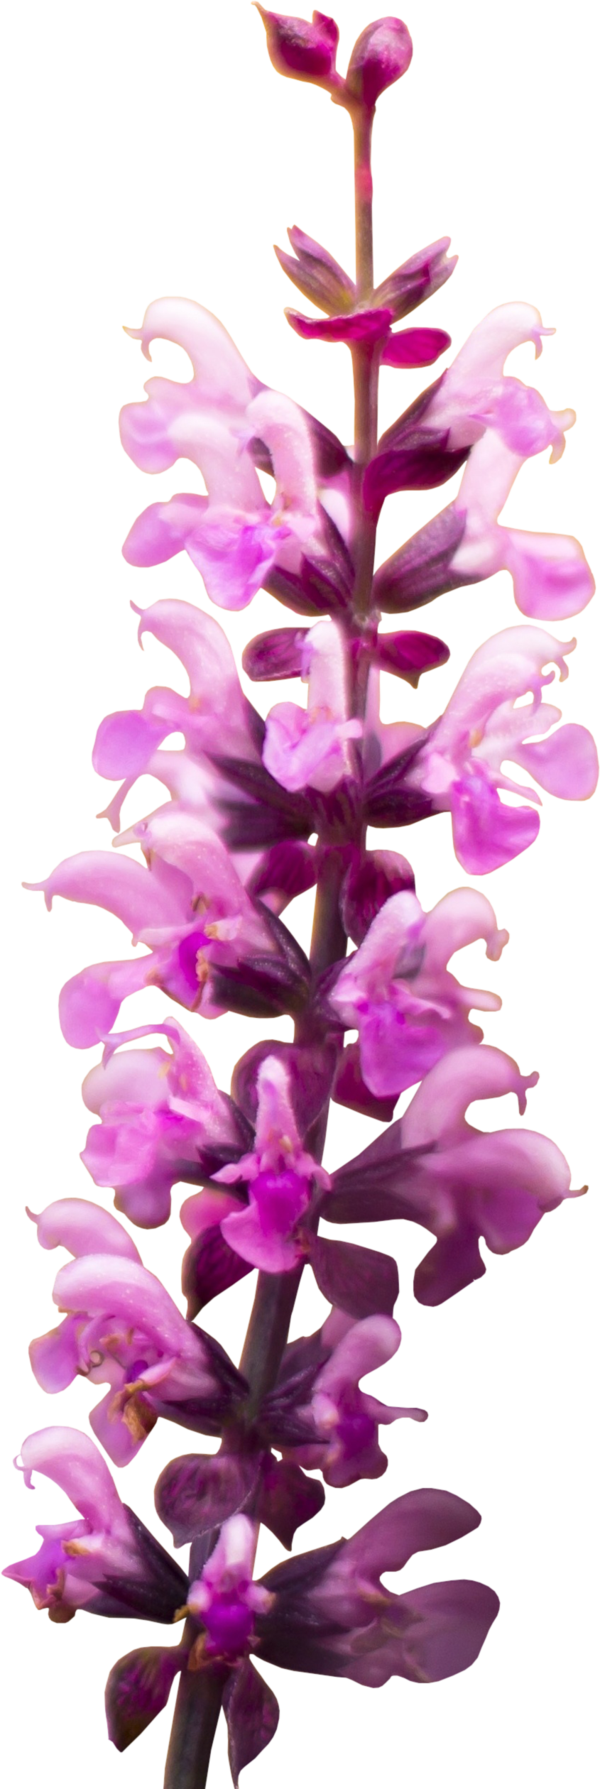 Snapdragons clipart #5, Download drawings